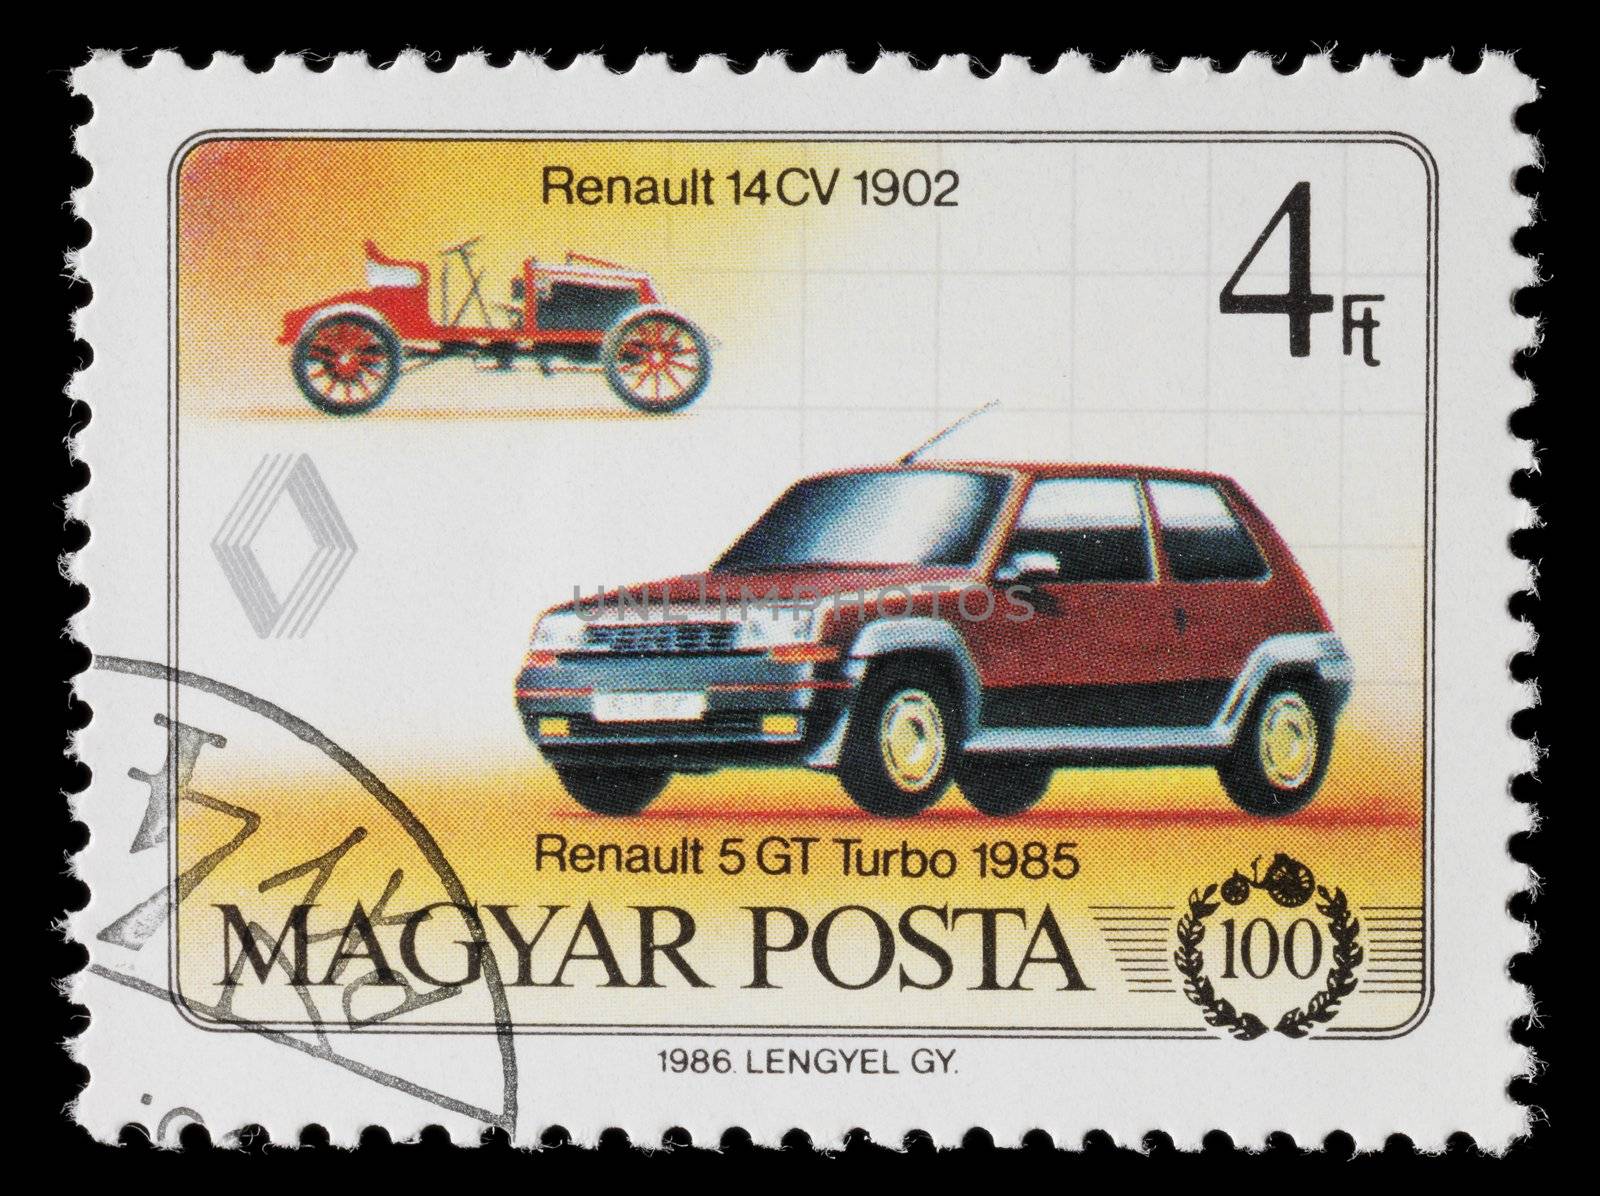 Renault Stamp by Stocksnapper